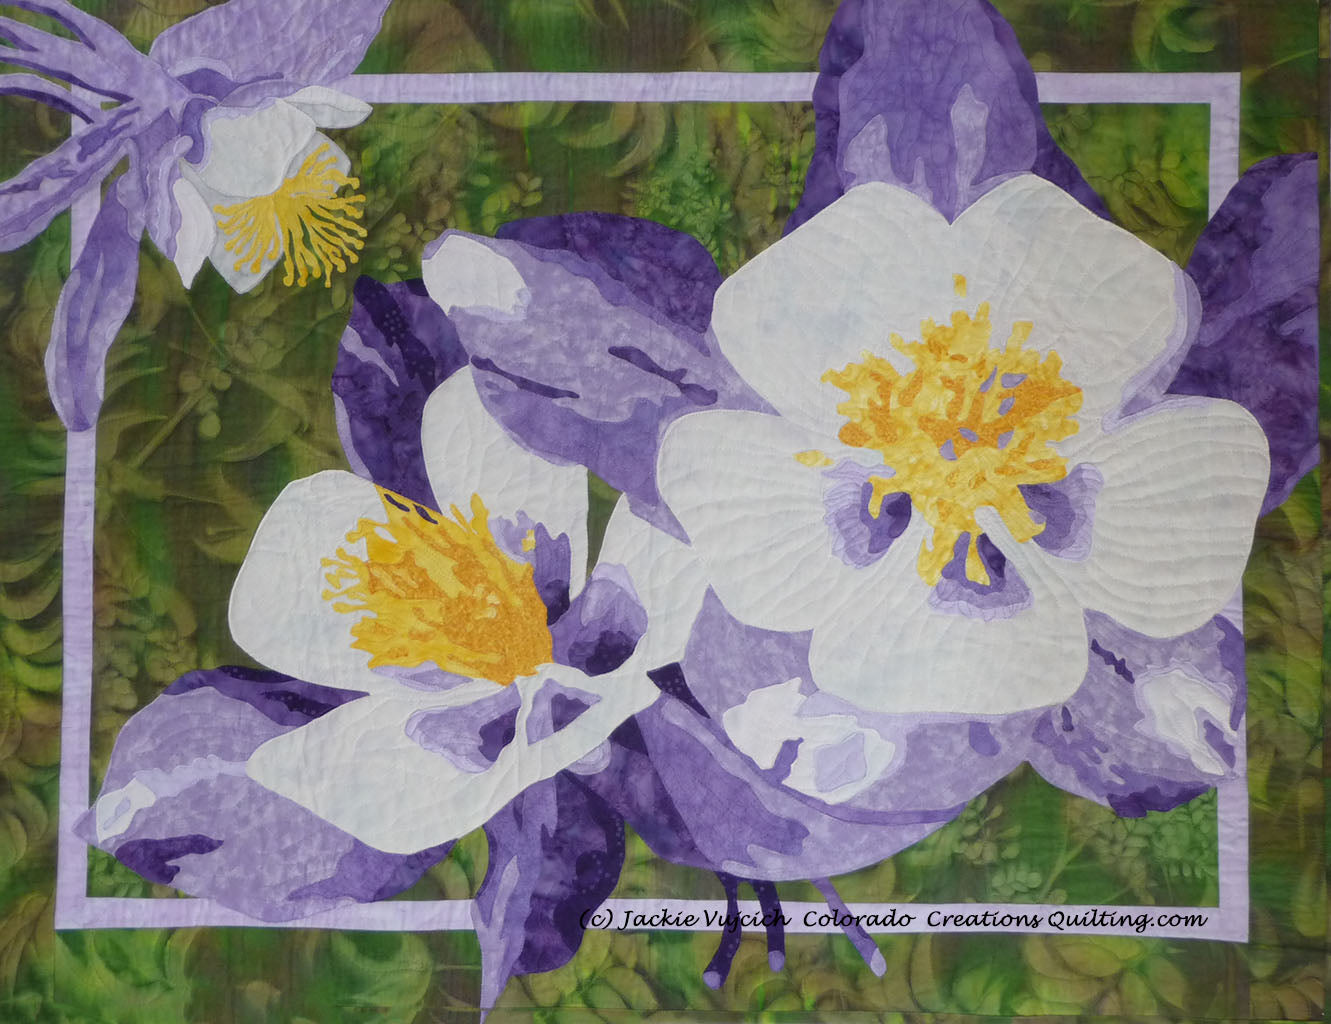 Colorful Columbines art quilt pattern by Colorado Creations Quilting